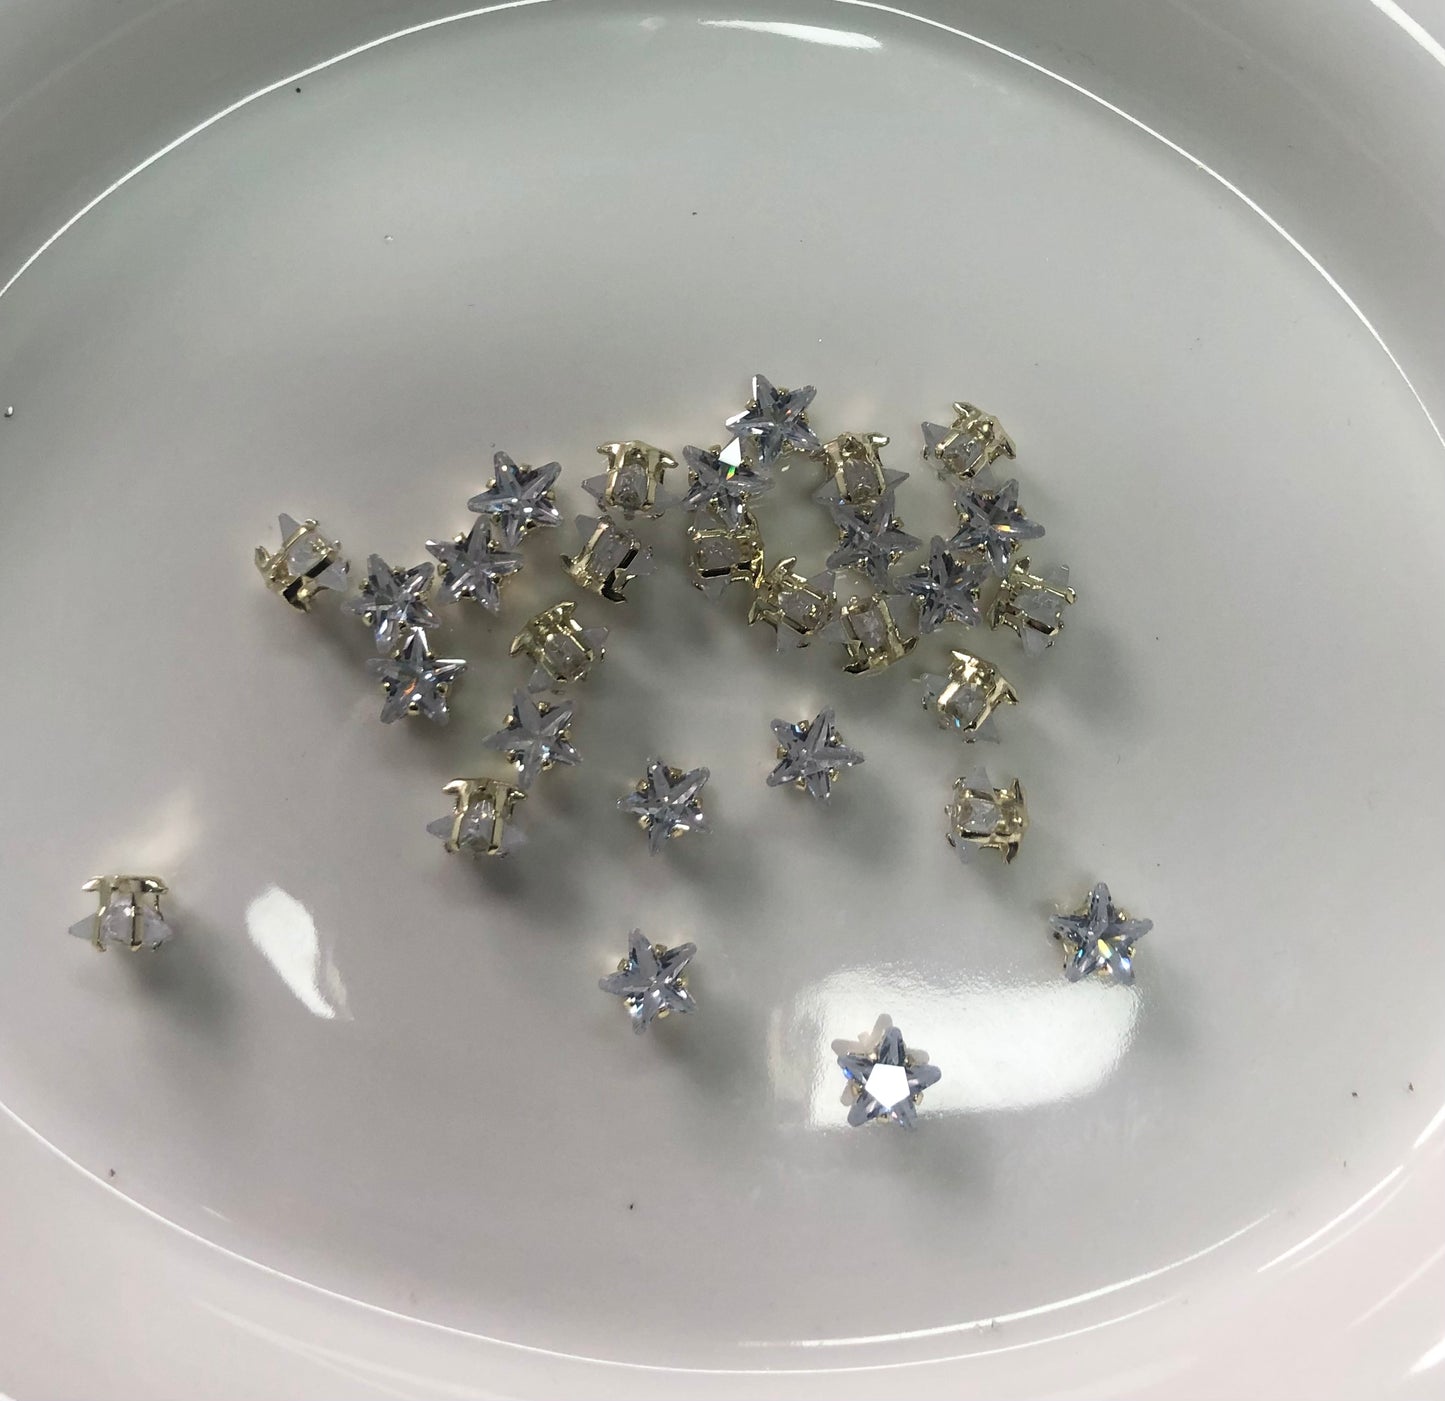 section Q zircon cuty charms